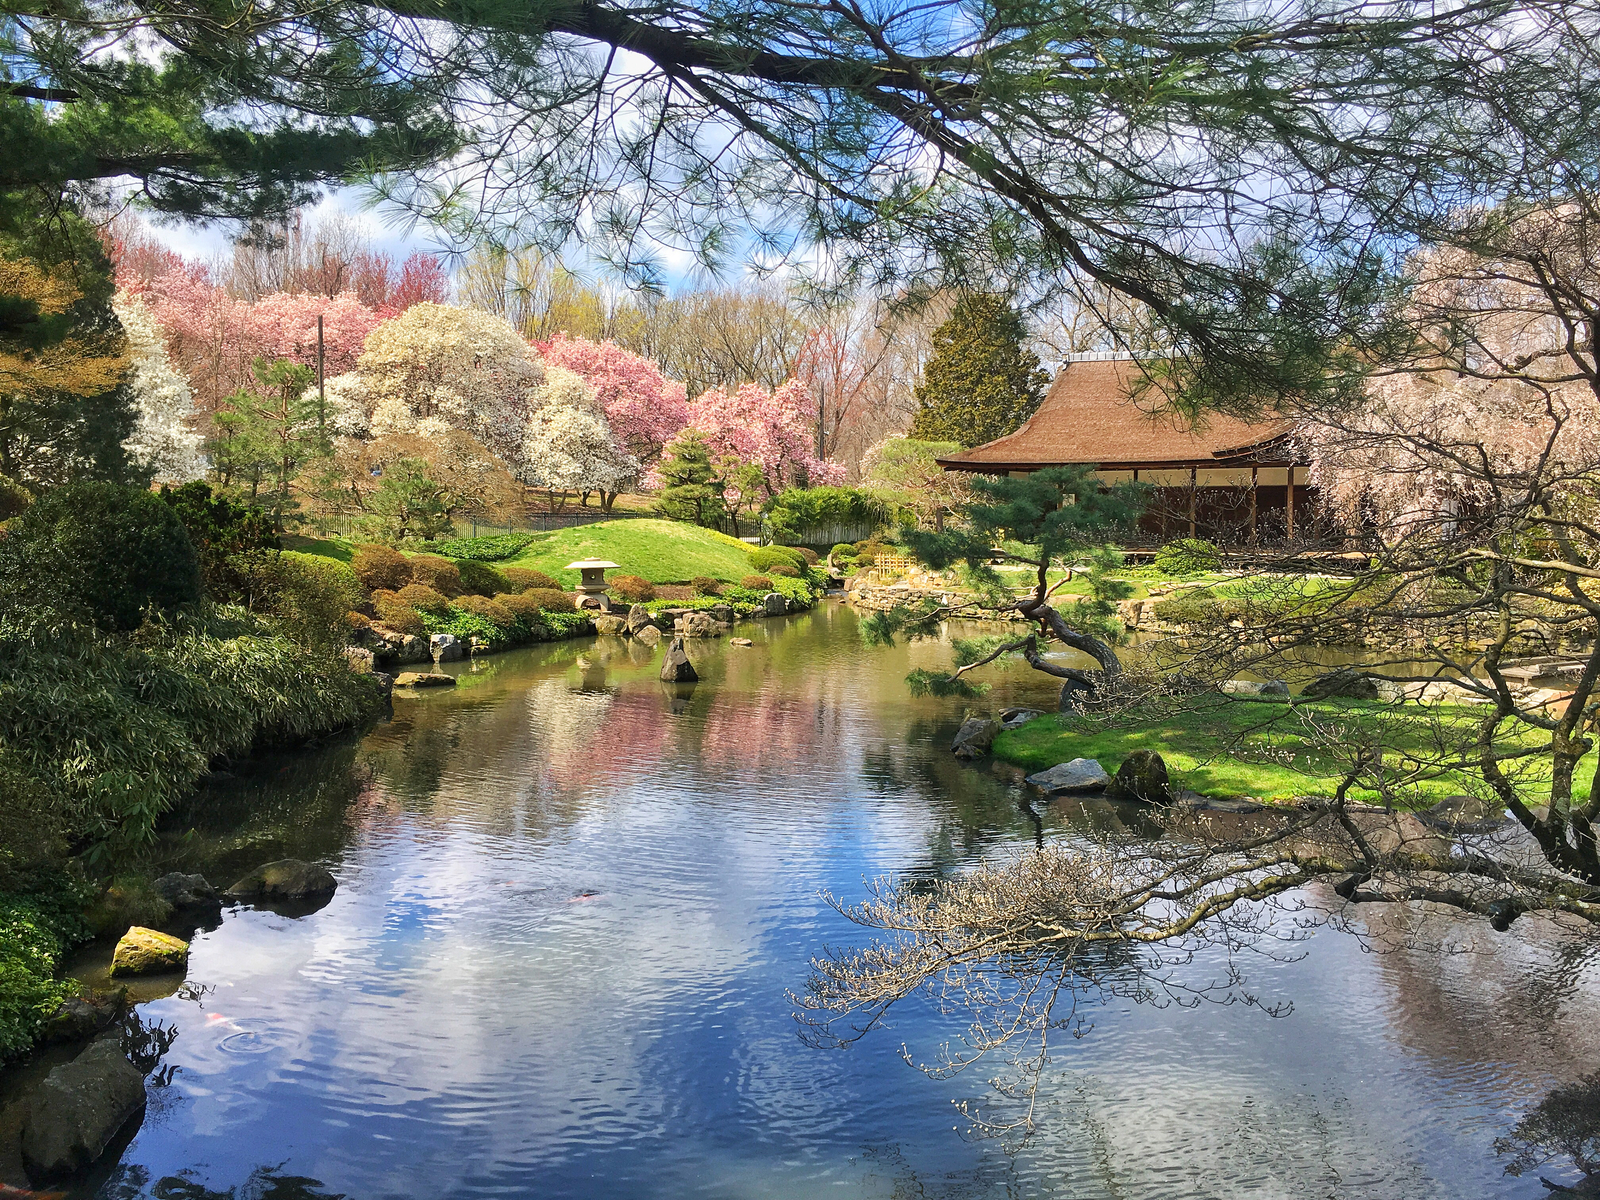 A traditional-style Japanese house and landscape in the middle of City, picture as a piece on the best things to do in Pennsylvania